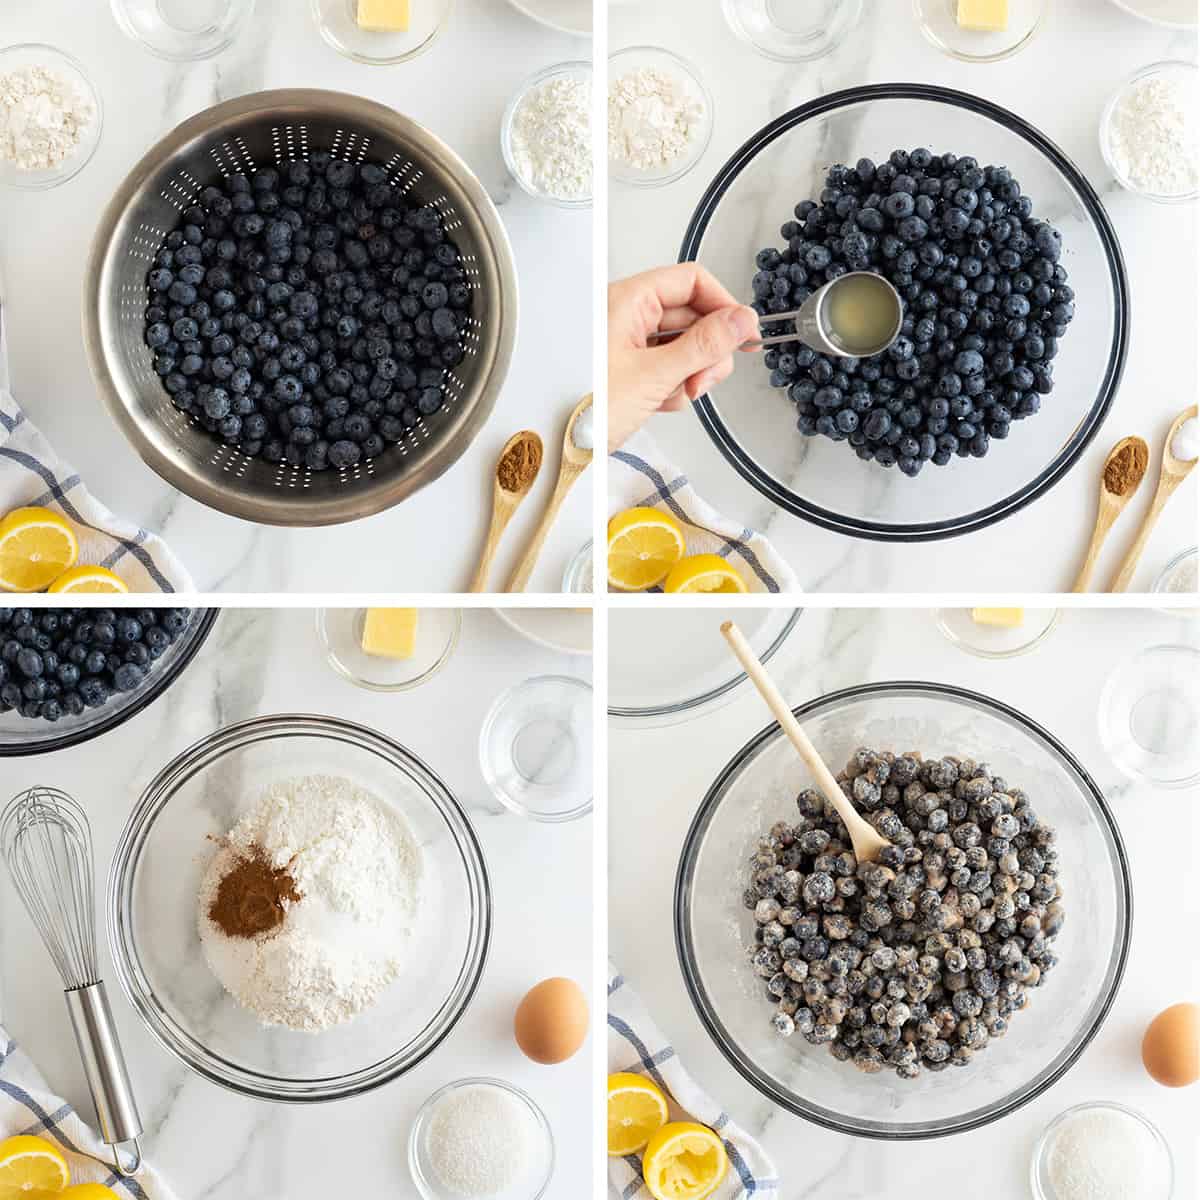 Four images of fresh blueberries, lemon juice, sugar and other ingredients being combined in a glass mixing bowl.